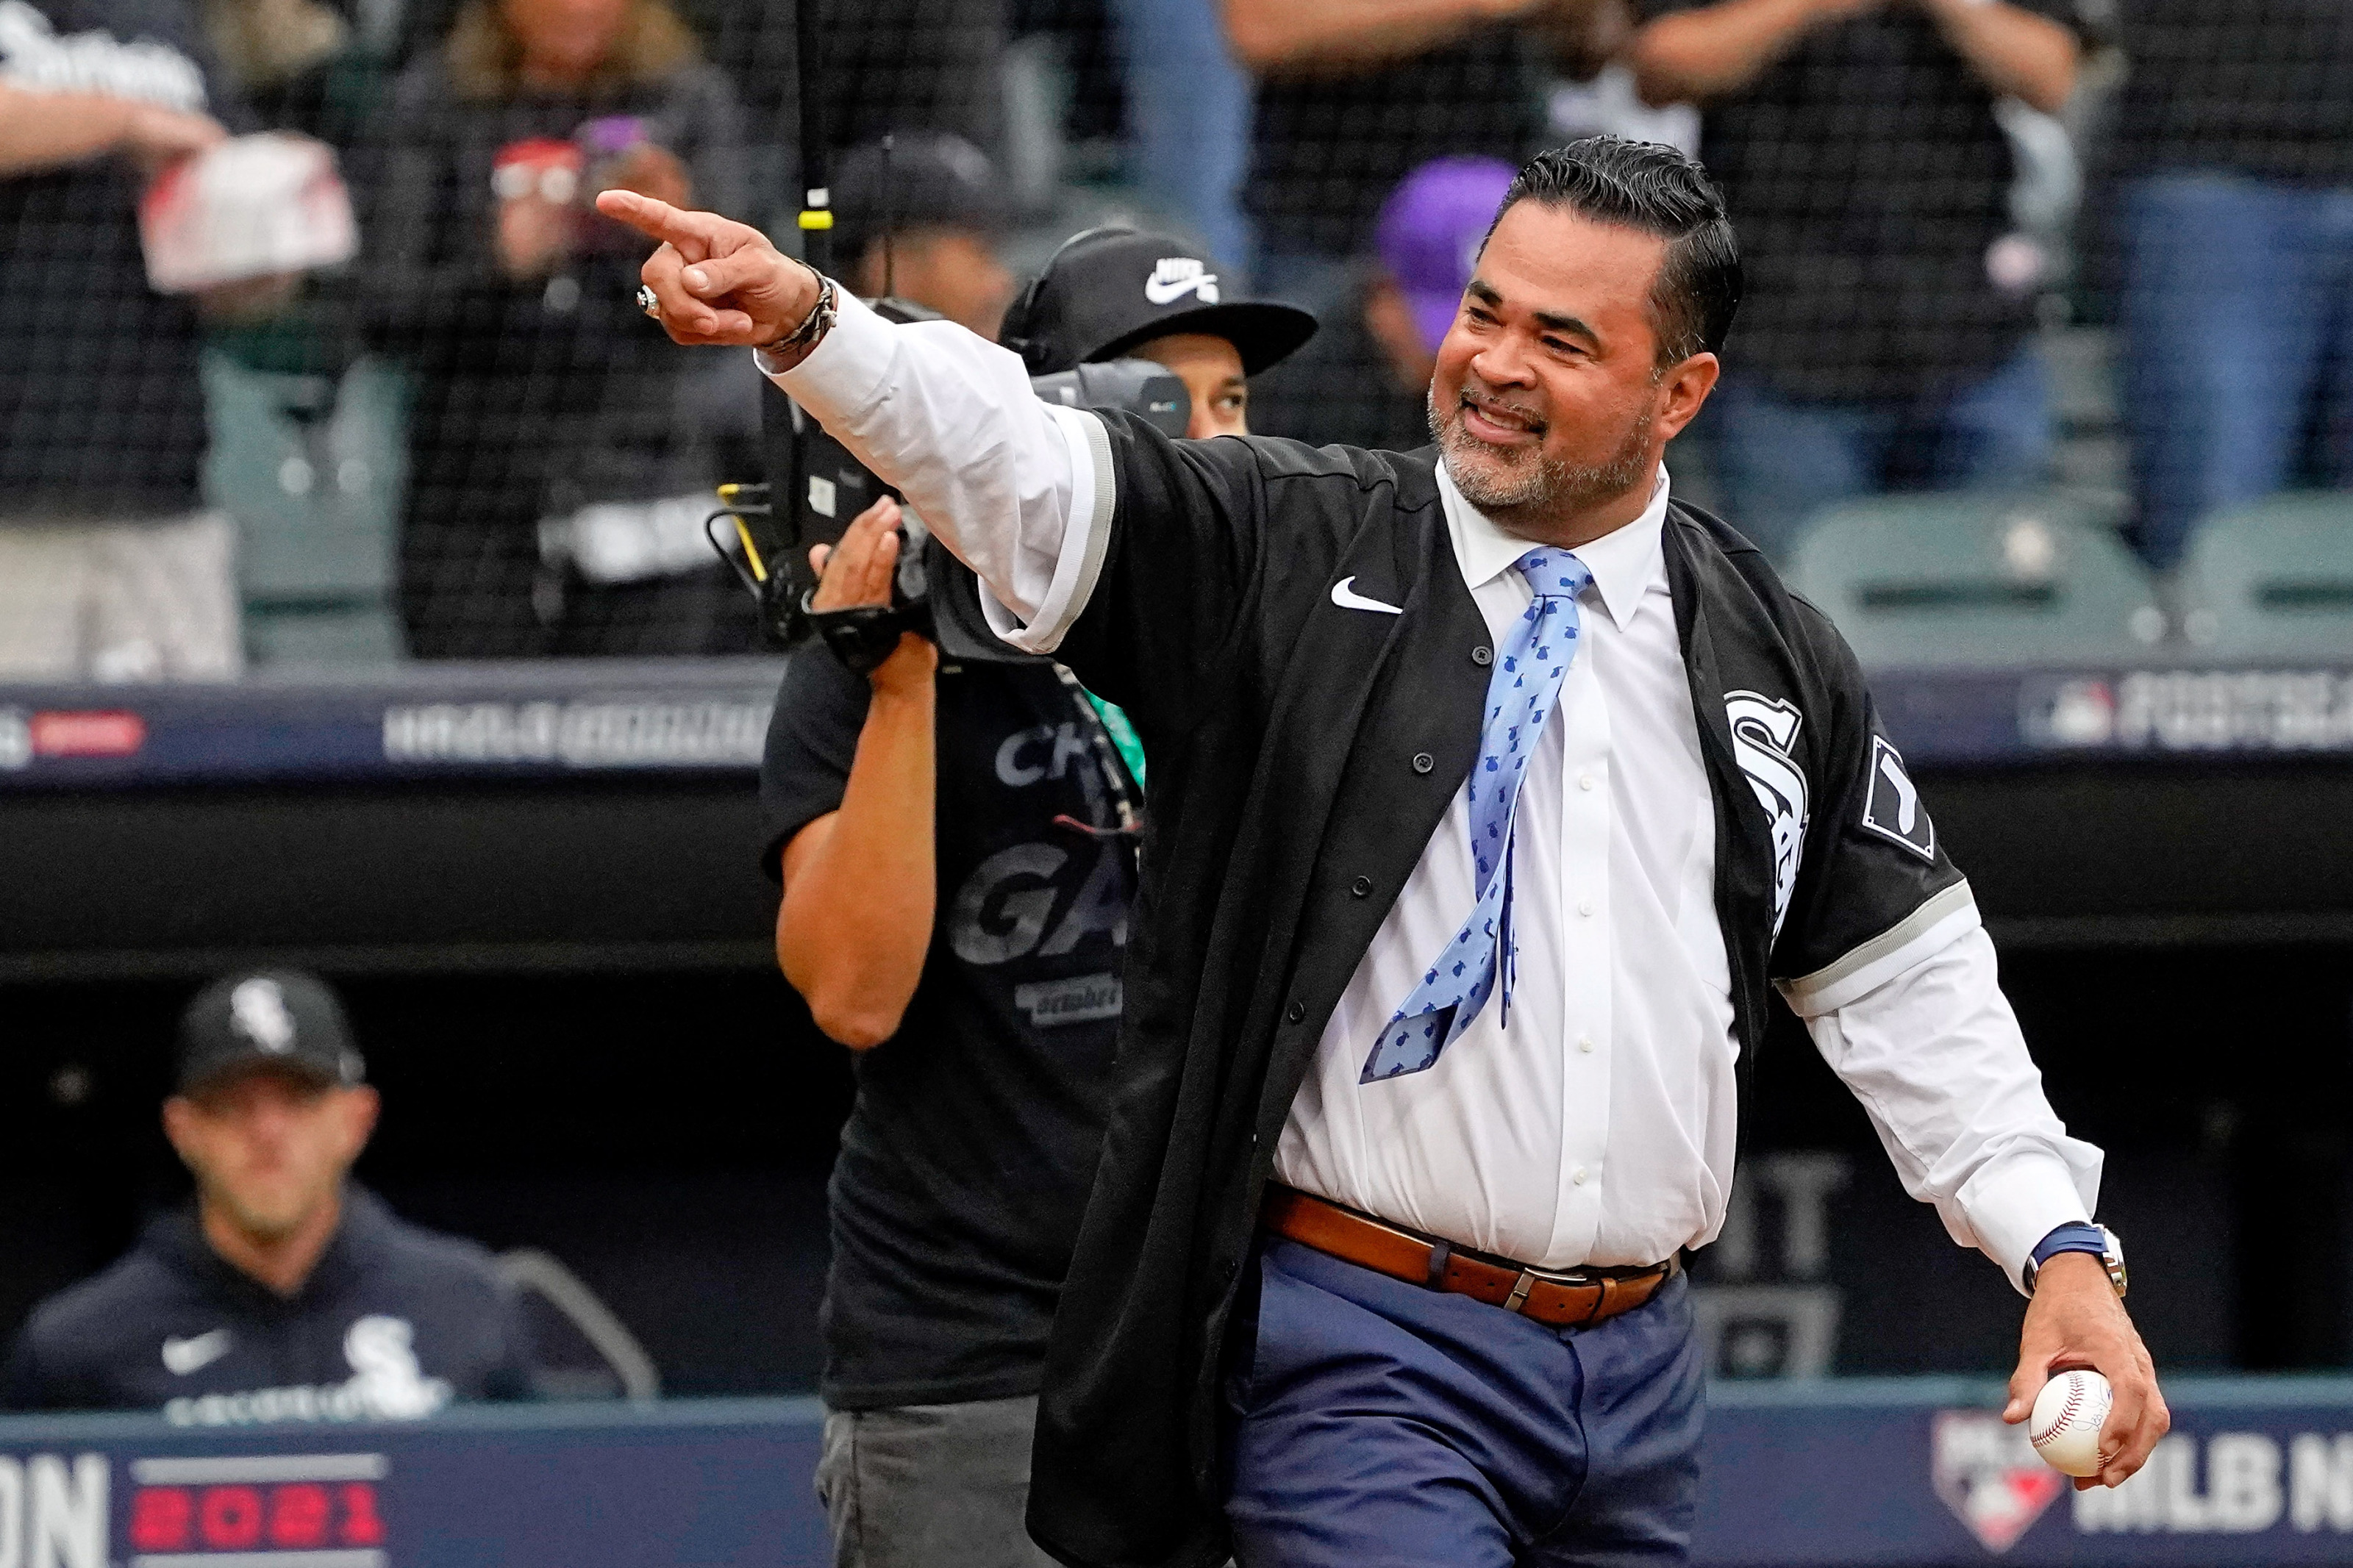 Former White Sox manager Ozzie Guillen feels disrespected